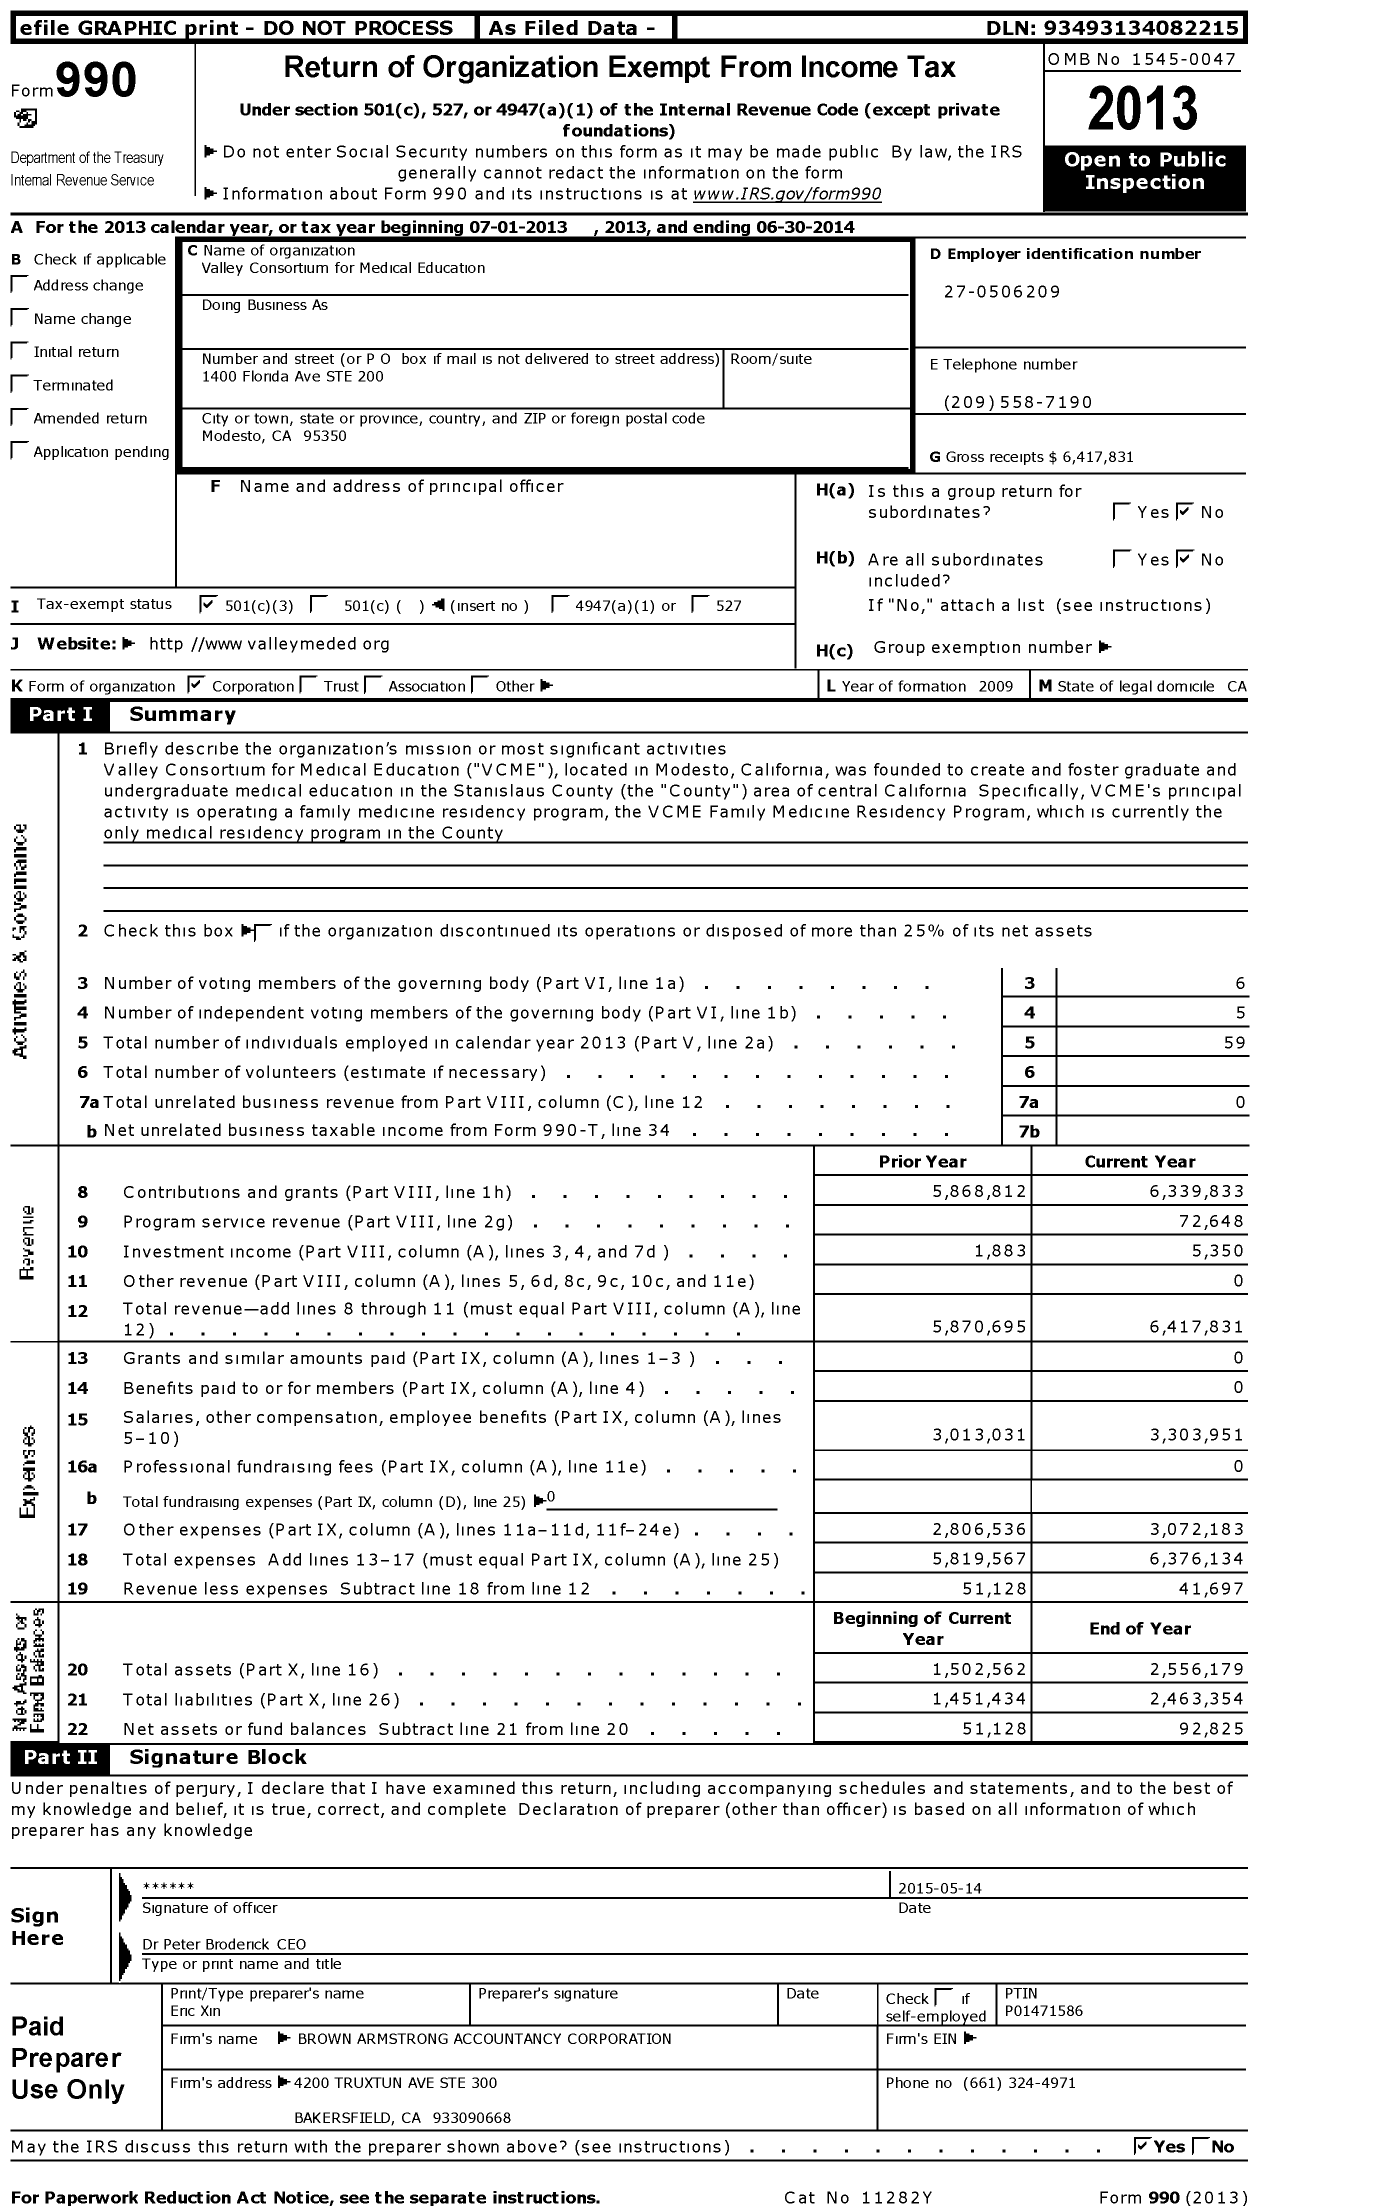 Image of first page of 2013 Form 990 for Valley Consortium for Medical Education (VCME)